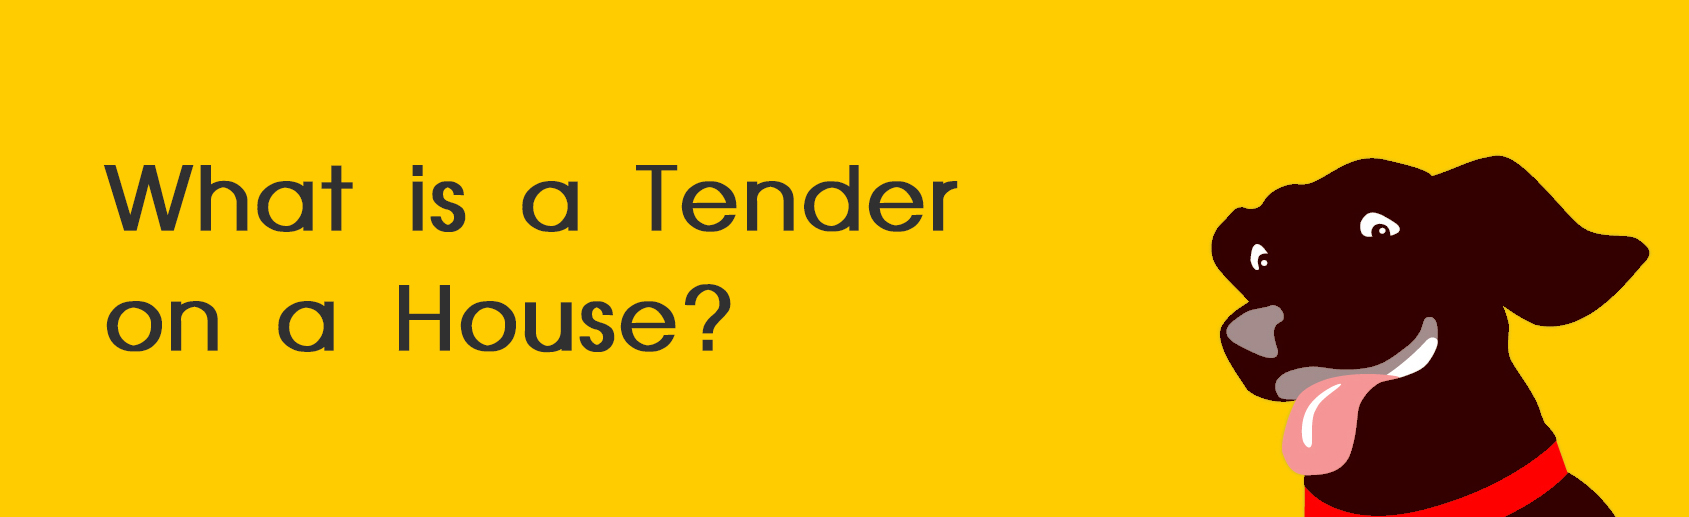 What is a Tender on a House